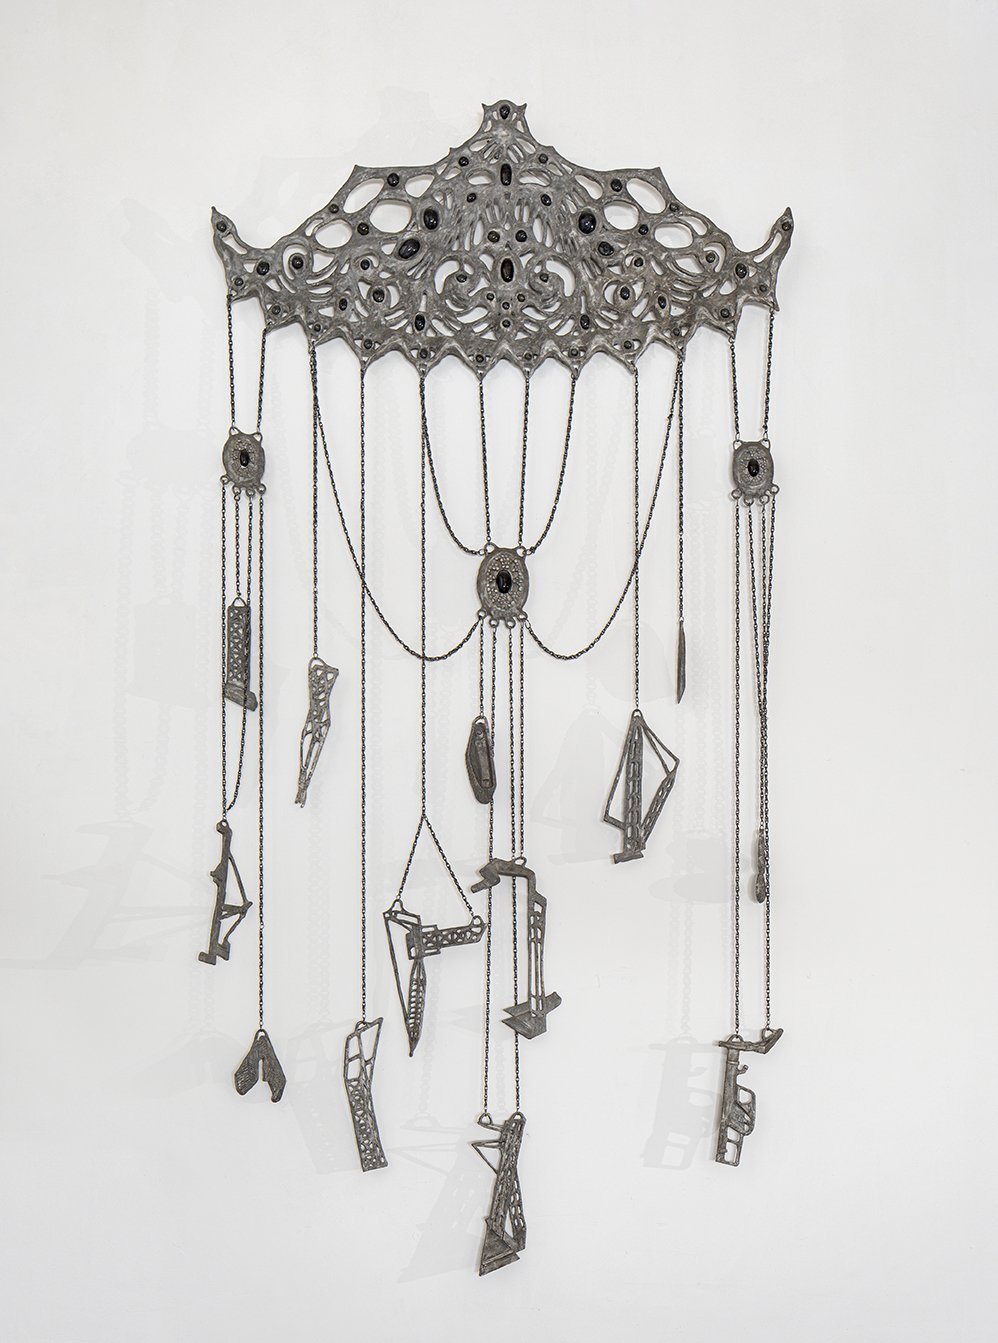  Marsha Pels,  Chatelaine of Eviction , 2013-2015. Patined cast aluminum, flame-worked glass, pewter chains. 120 x 60 x 2 inches. 